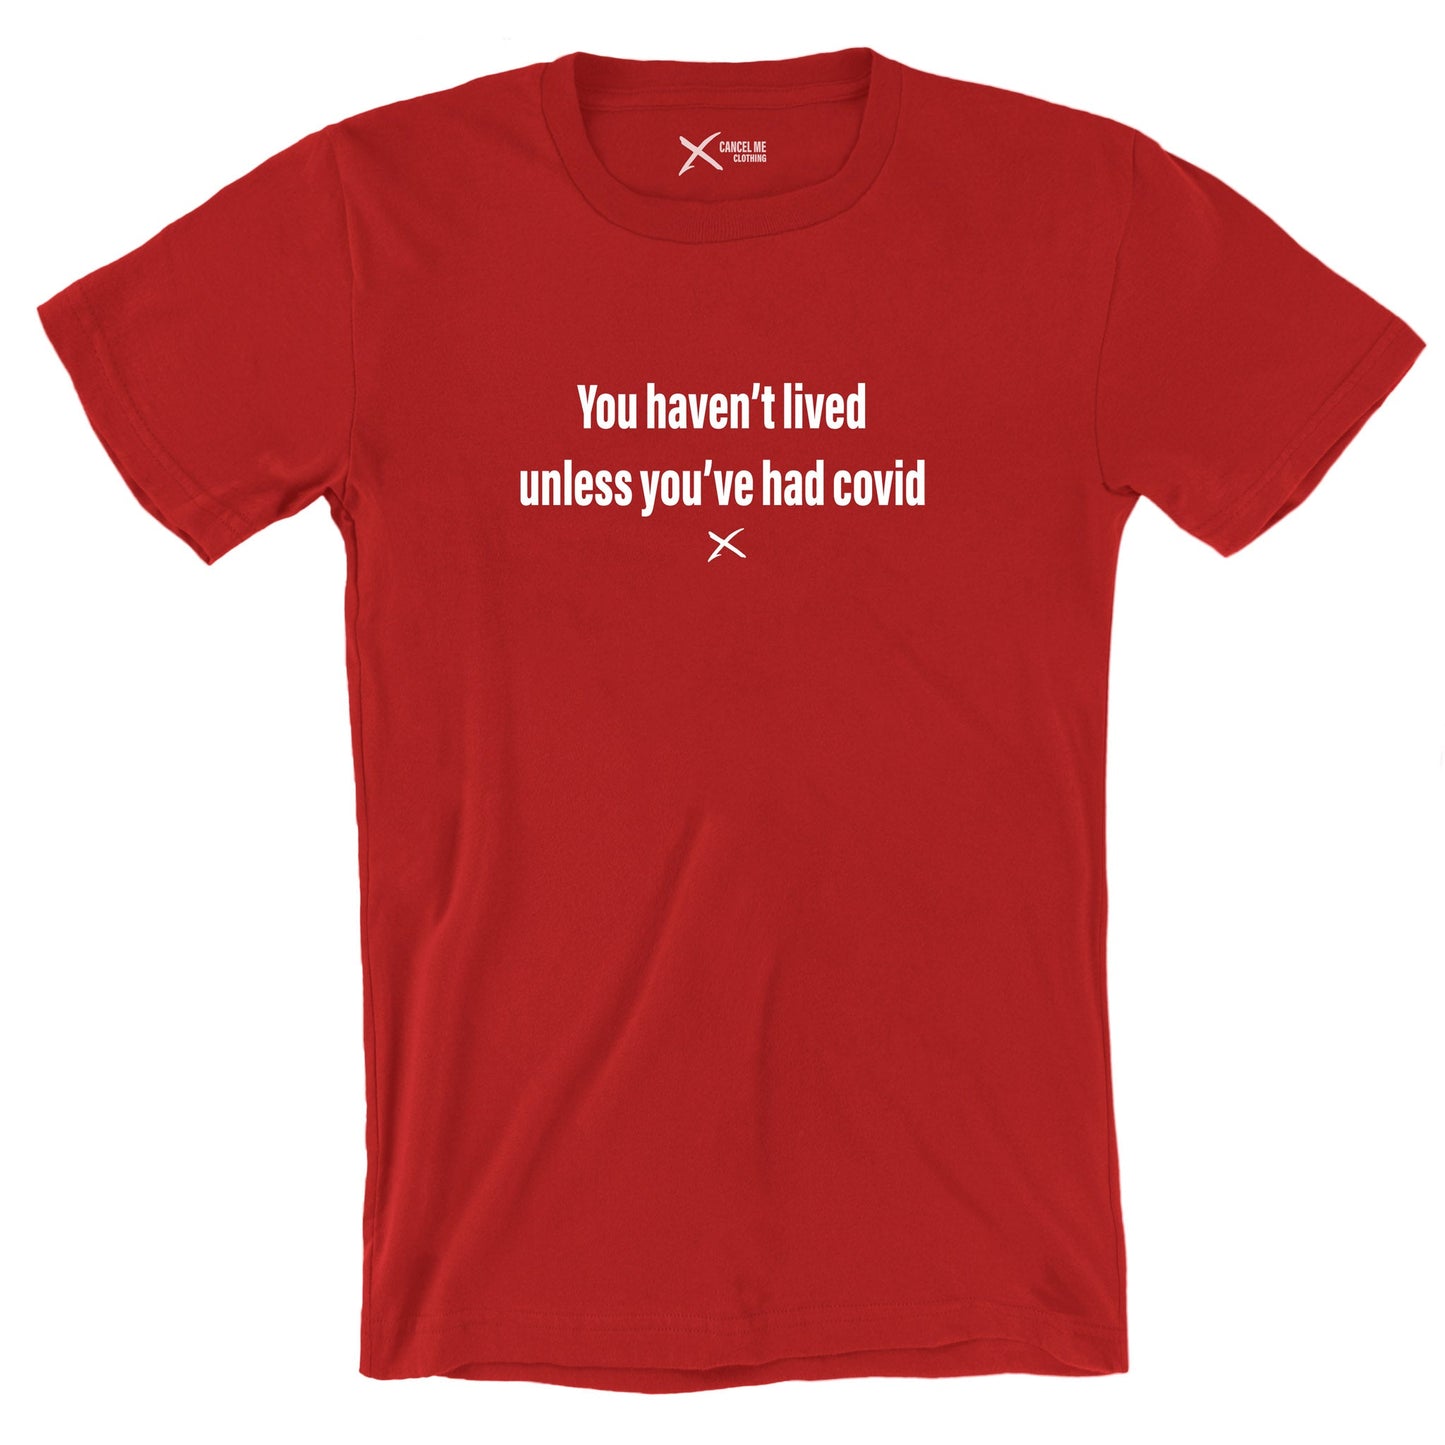 You haven't lived unless you've had covid - Shirt